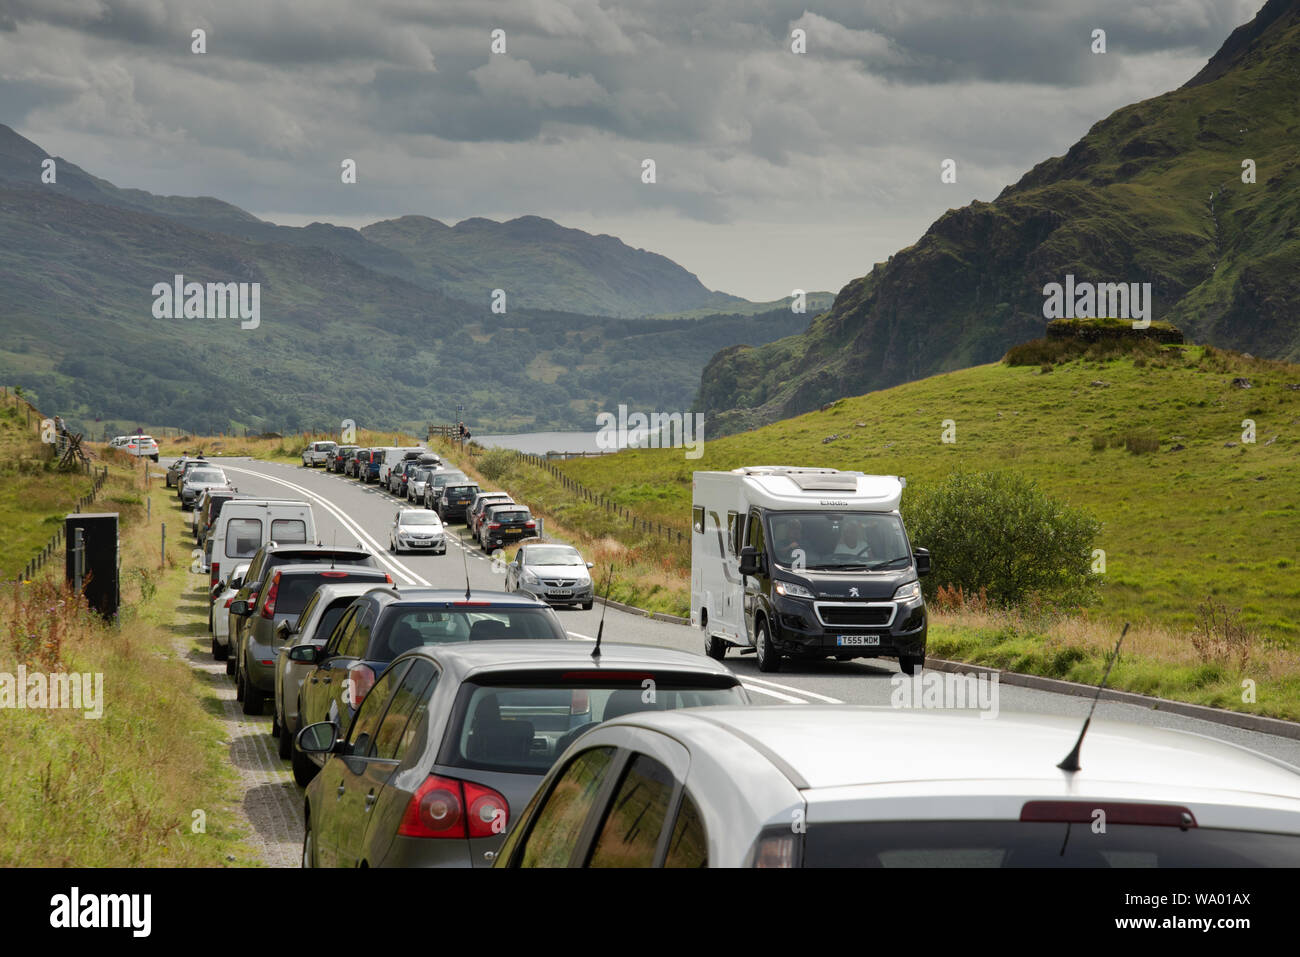 Congestion in Snowdonia, North Wales, 15th August 2019. Cars parked legally on the A498 - the Nant Gwynant pass, convenient for walkers to access the Pyg Track and Miners Track, leading to the peak of Snowdon. The popularity of the national park in summer means that many tourists drive to the area, there is a lot of traffic and these car parks are often full. The pass descends to Llyn Gwynant and to another car park popular with people that climb Snowdon via the Watkins Path. This road also leads to the beautiful village of Beddgelert and the picturesque Llyn Dinas. Stock Photo